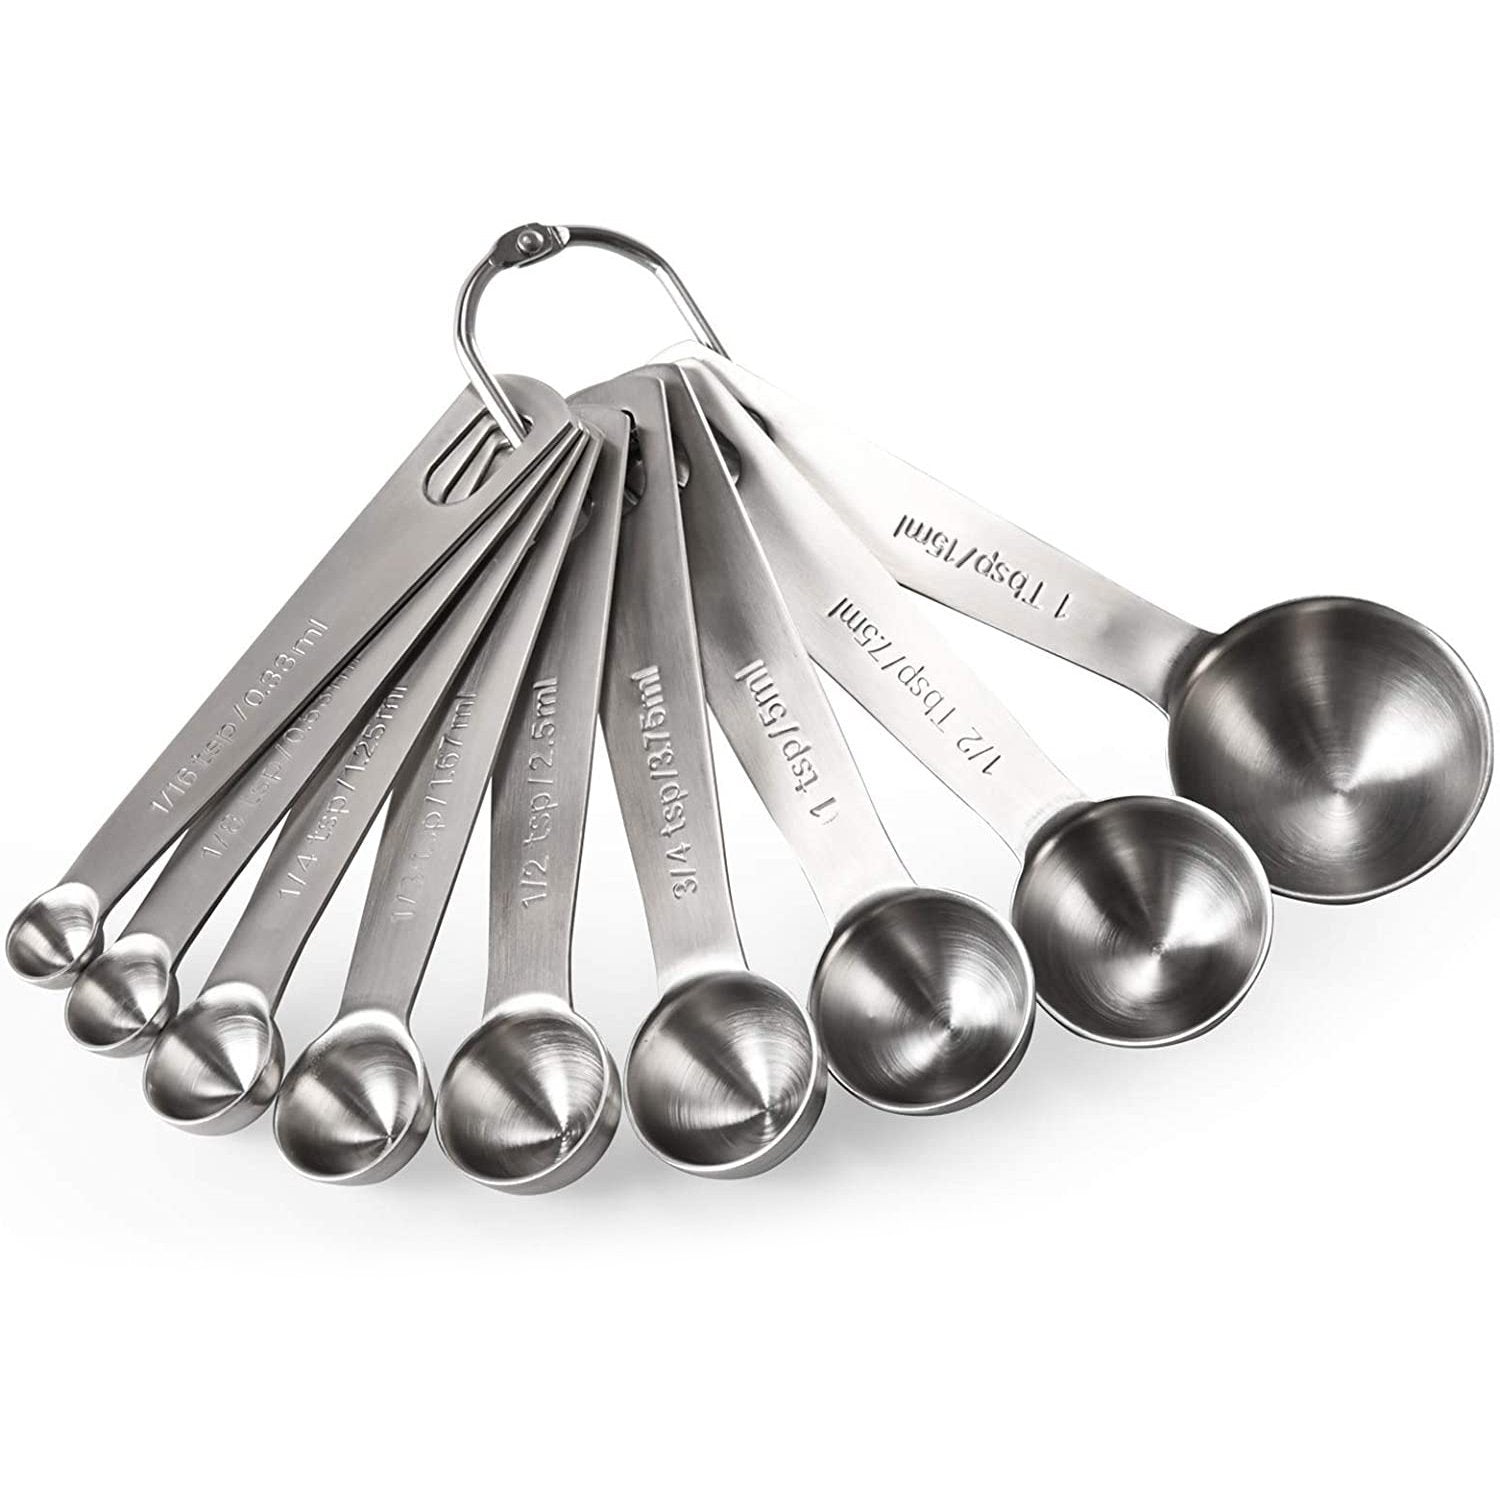 Measuring Spoons Set 5 Pcs Small Stainless Steel Mini Measuring Spoons 1/4  1/8 1/16 1/32 1/64 tsp Dry or Liquid Ingredients Teas